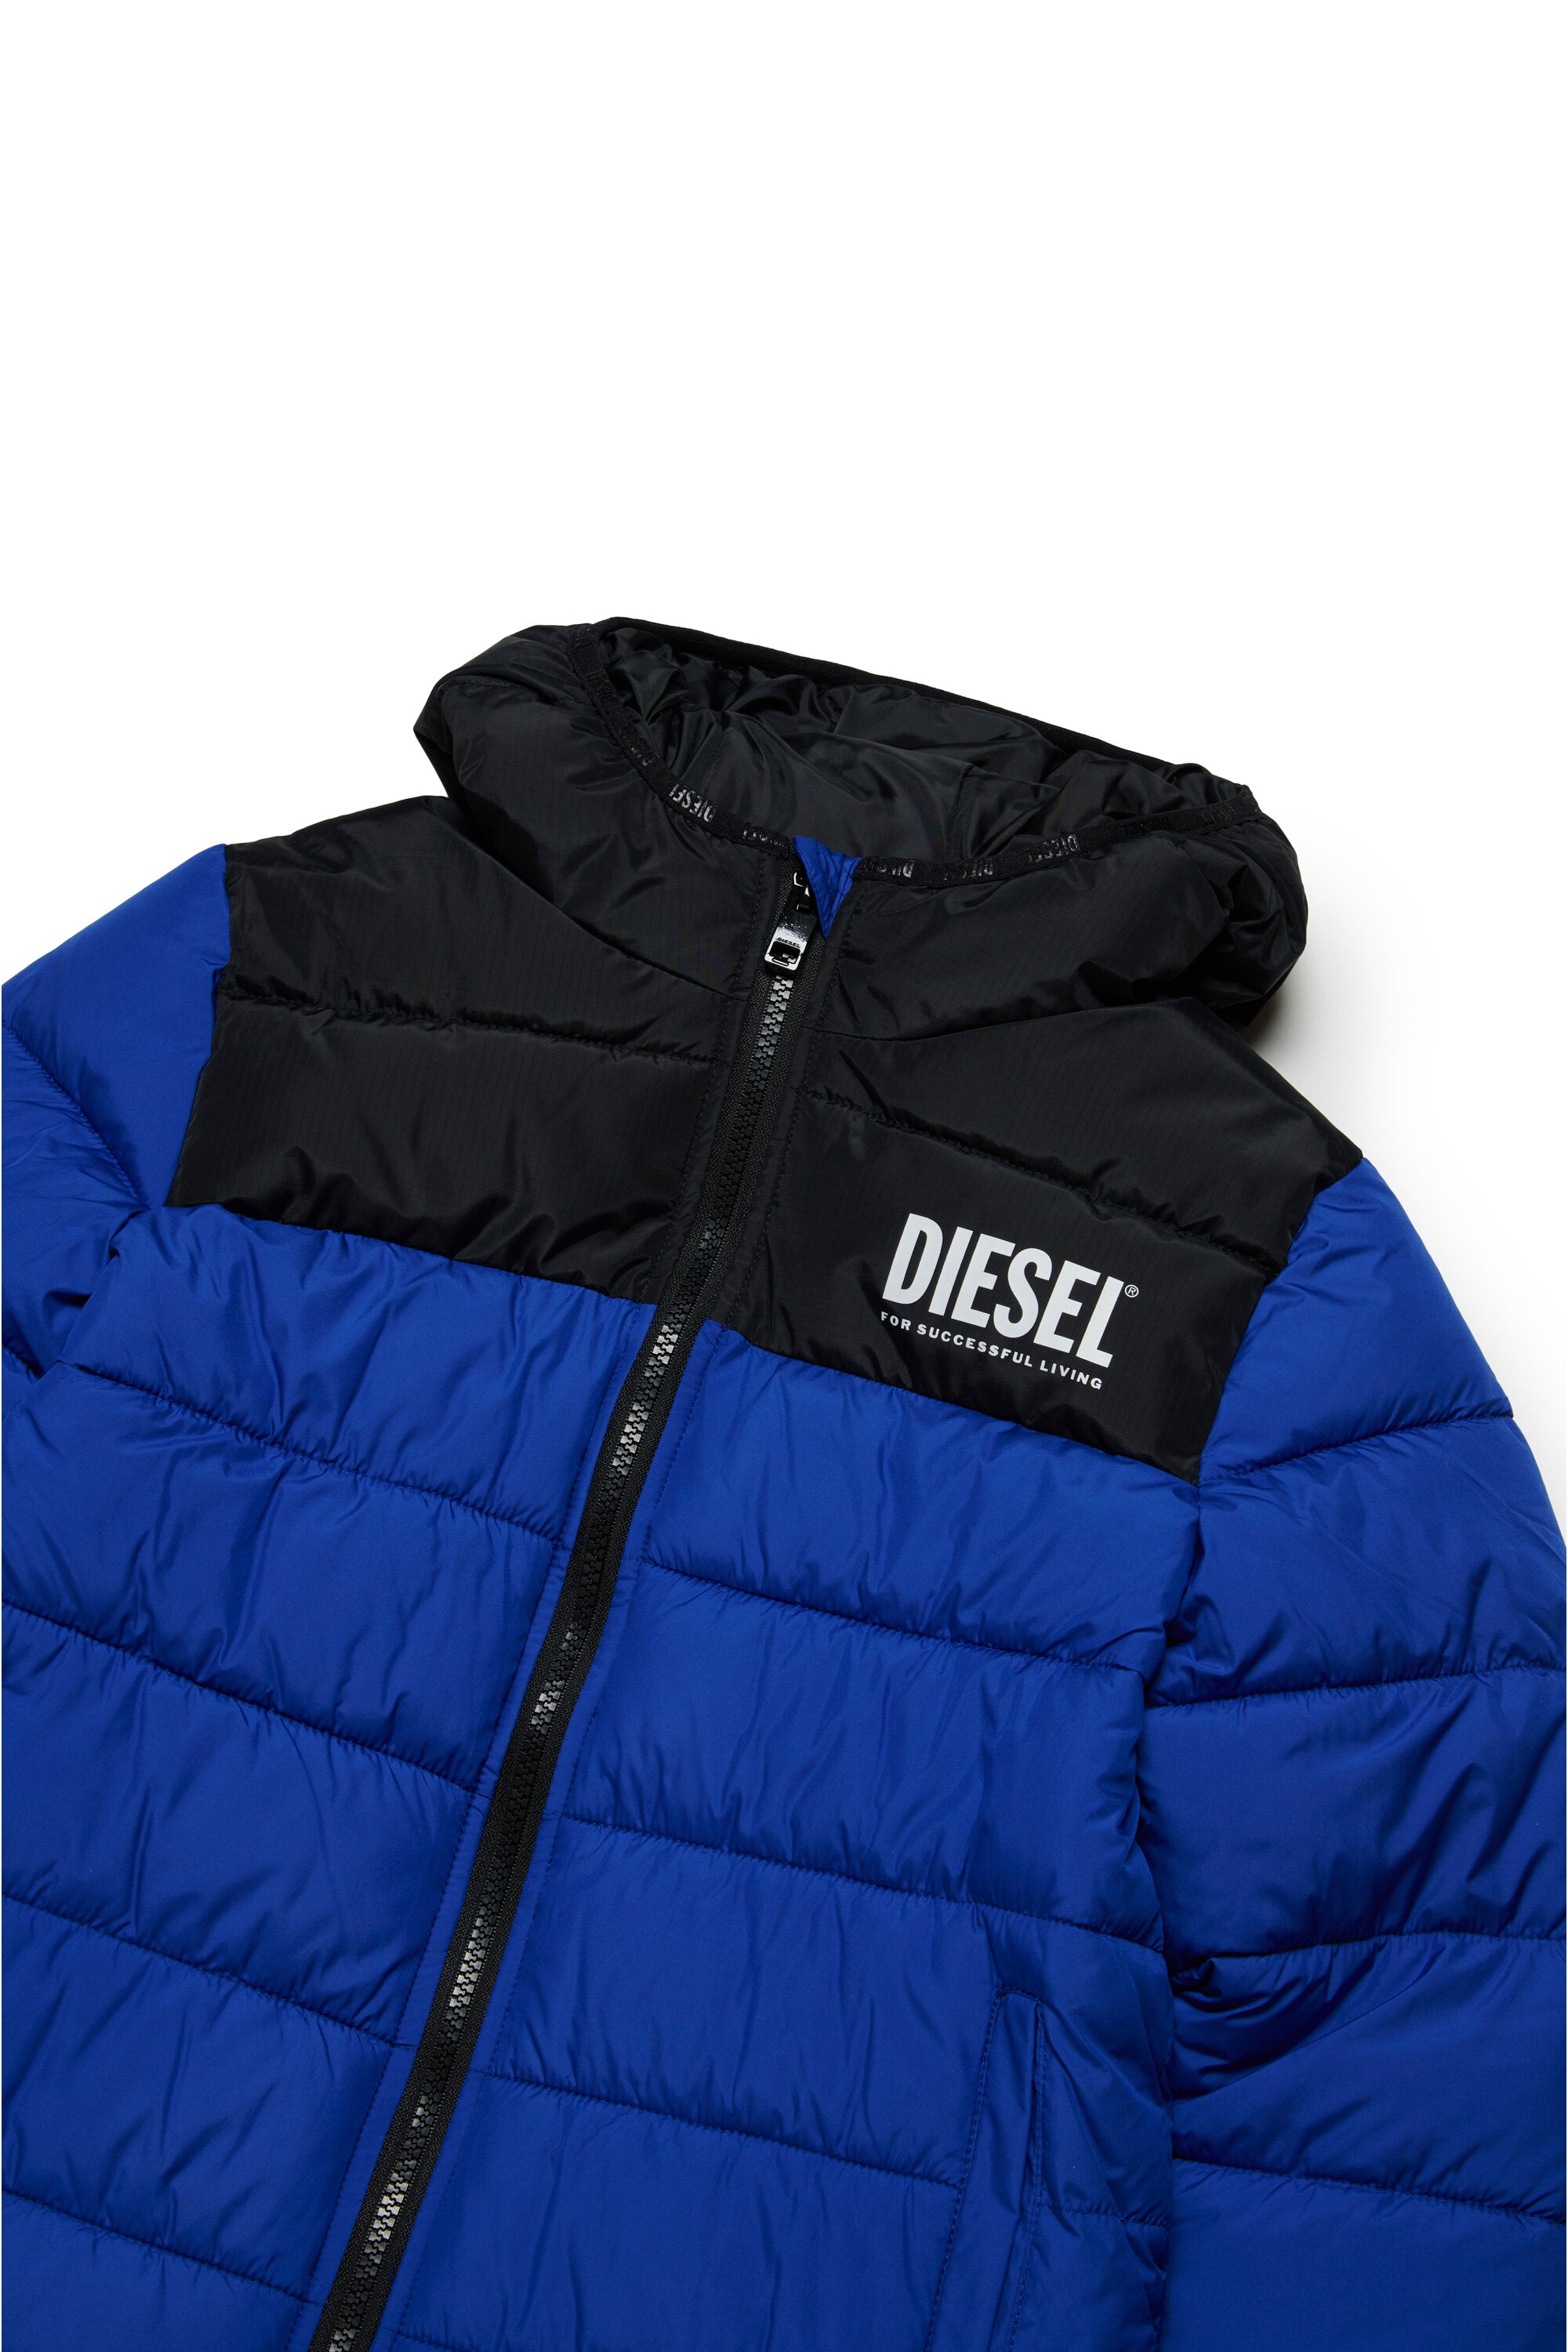 Padded jacket with hood and Diesel logo